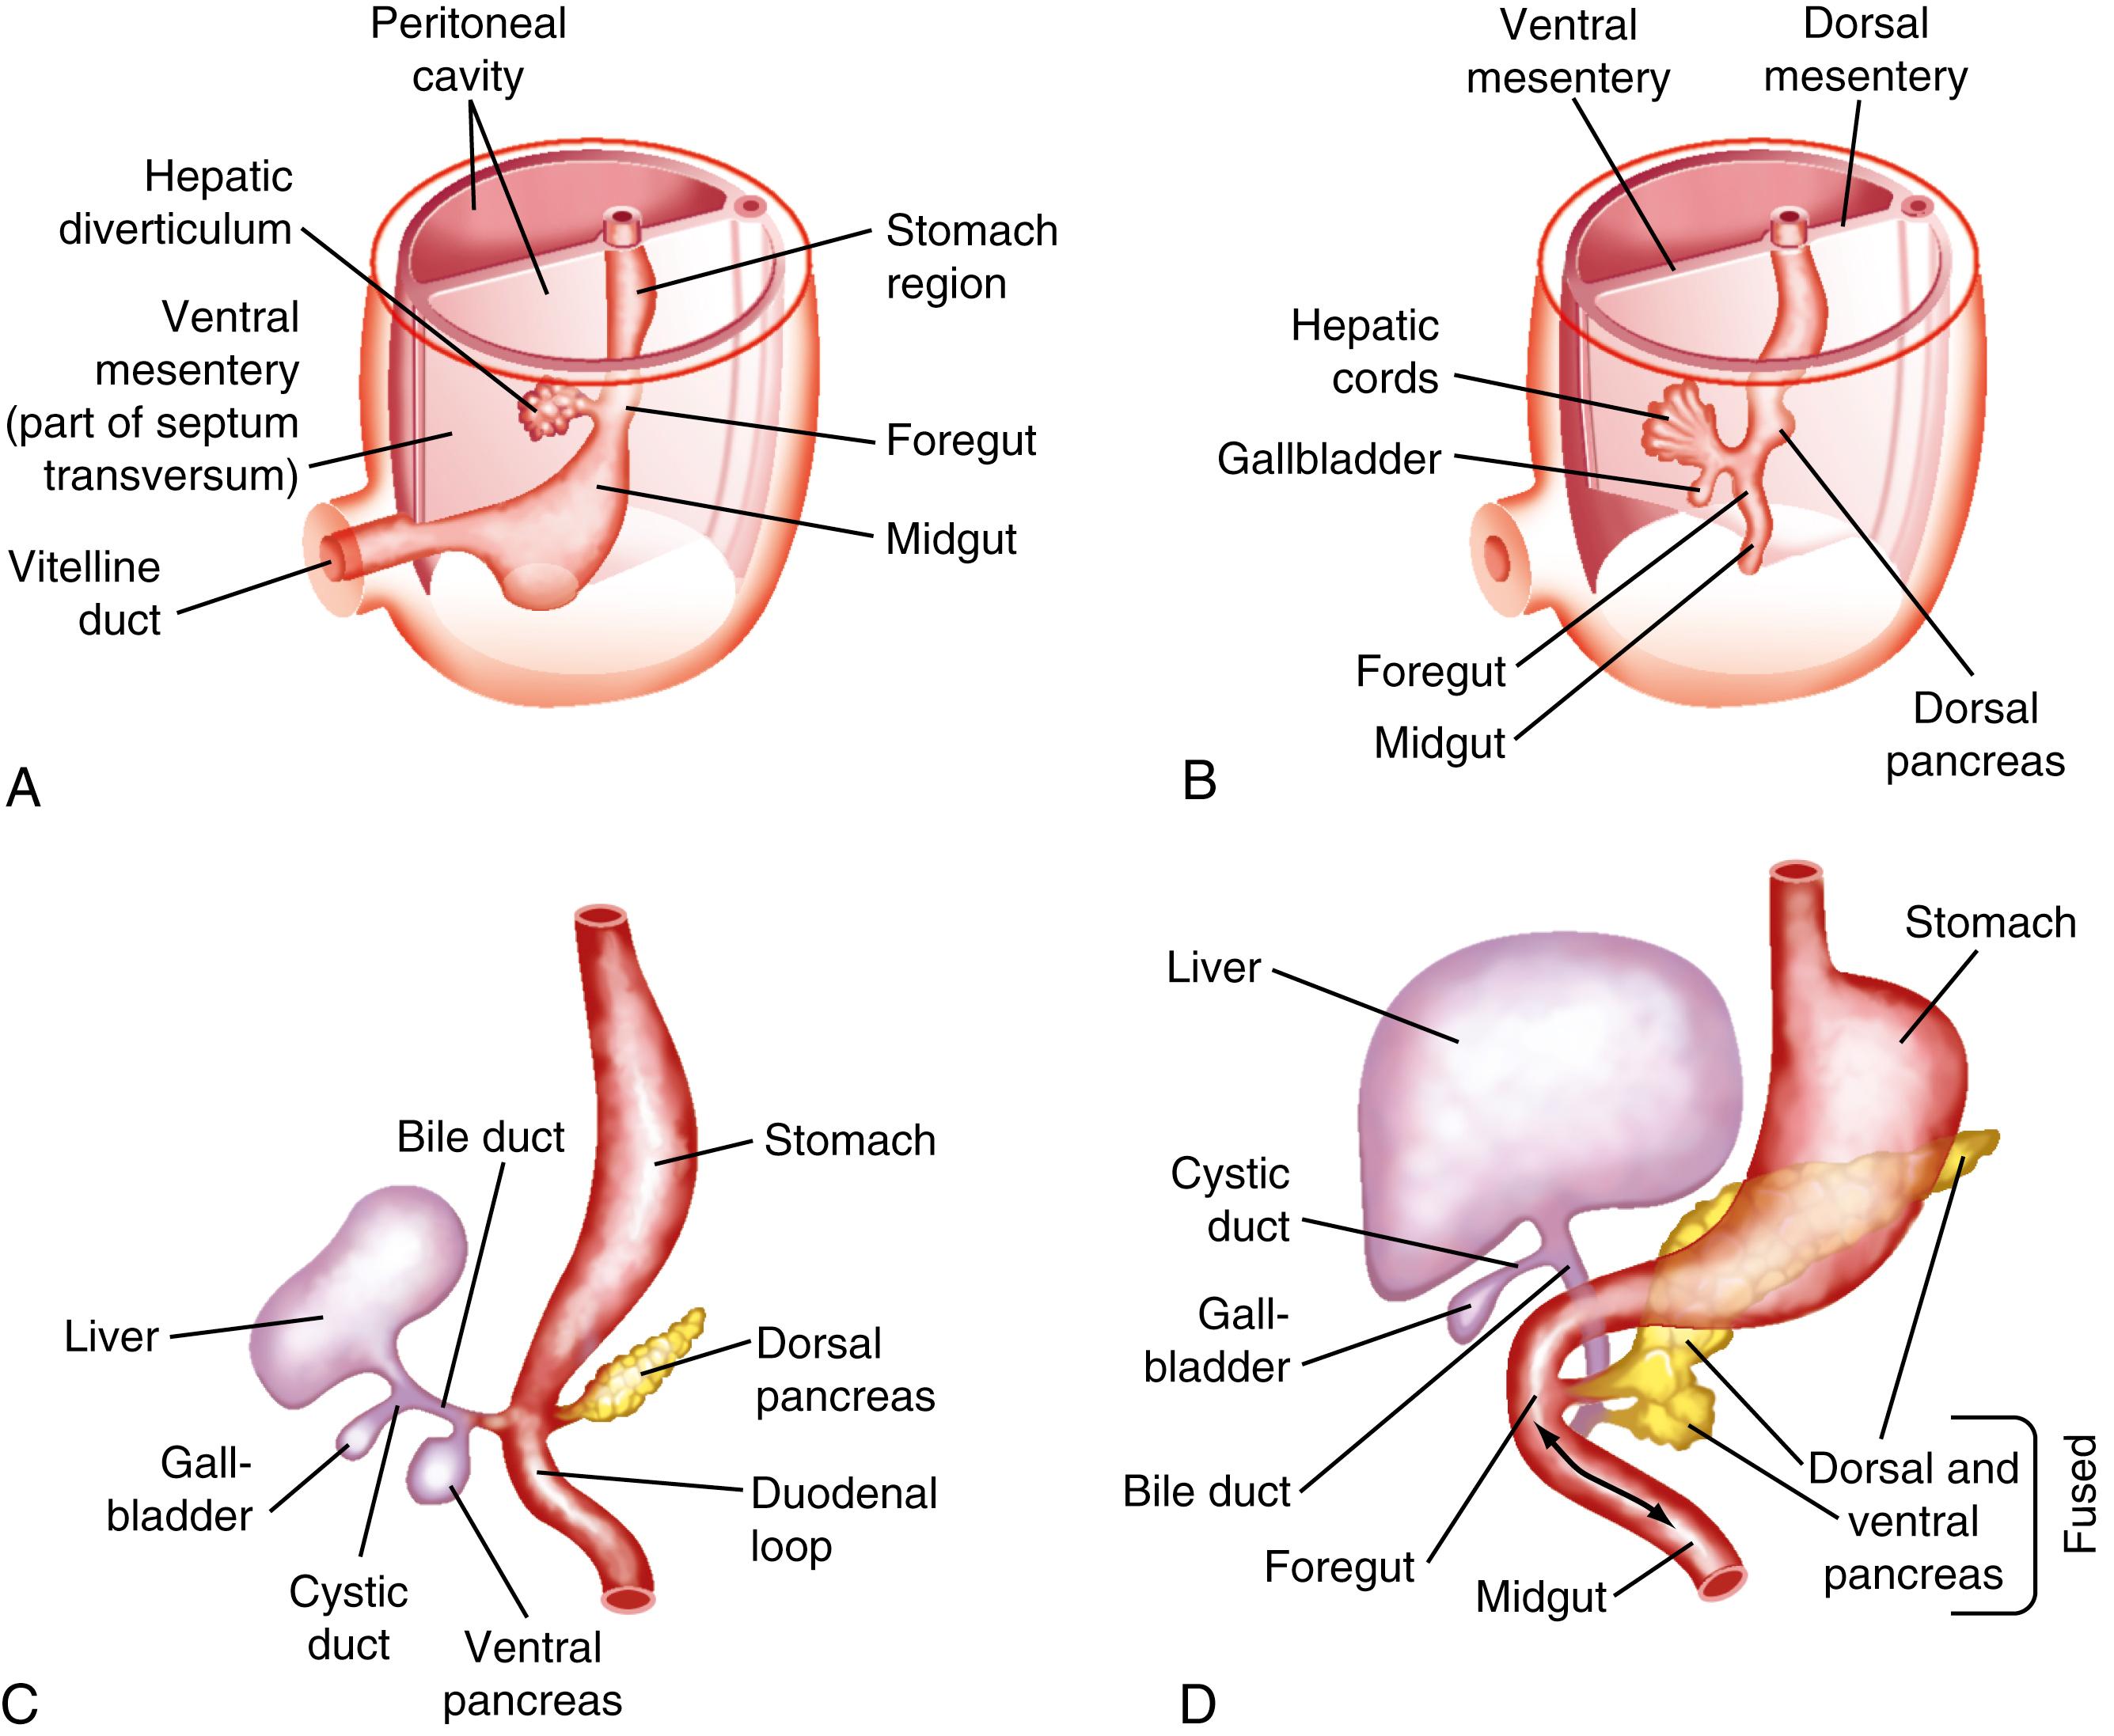 Fig. 62.1, Stages in embryologic development of the liver, gallbladder, extrahepatic ducts, pancreas, and duodenum.